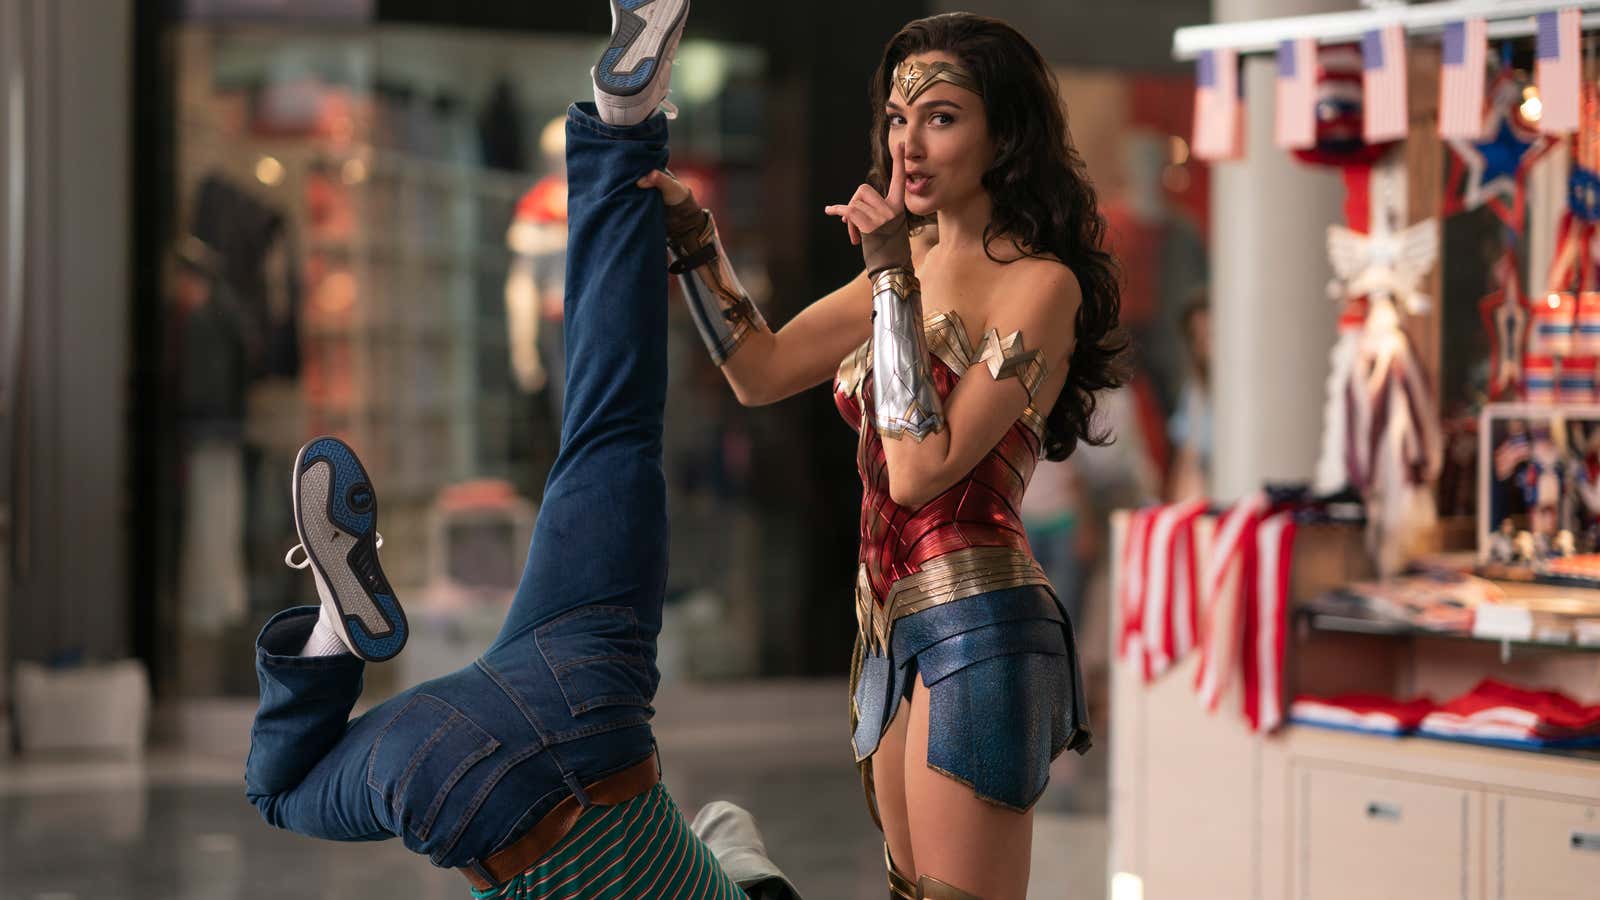 Wonder Woman 1984 Review Needs More Action—and Wonder Woman